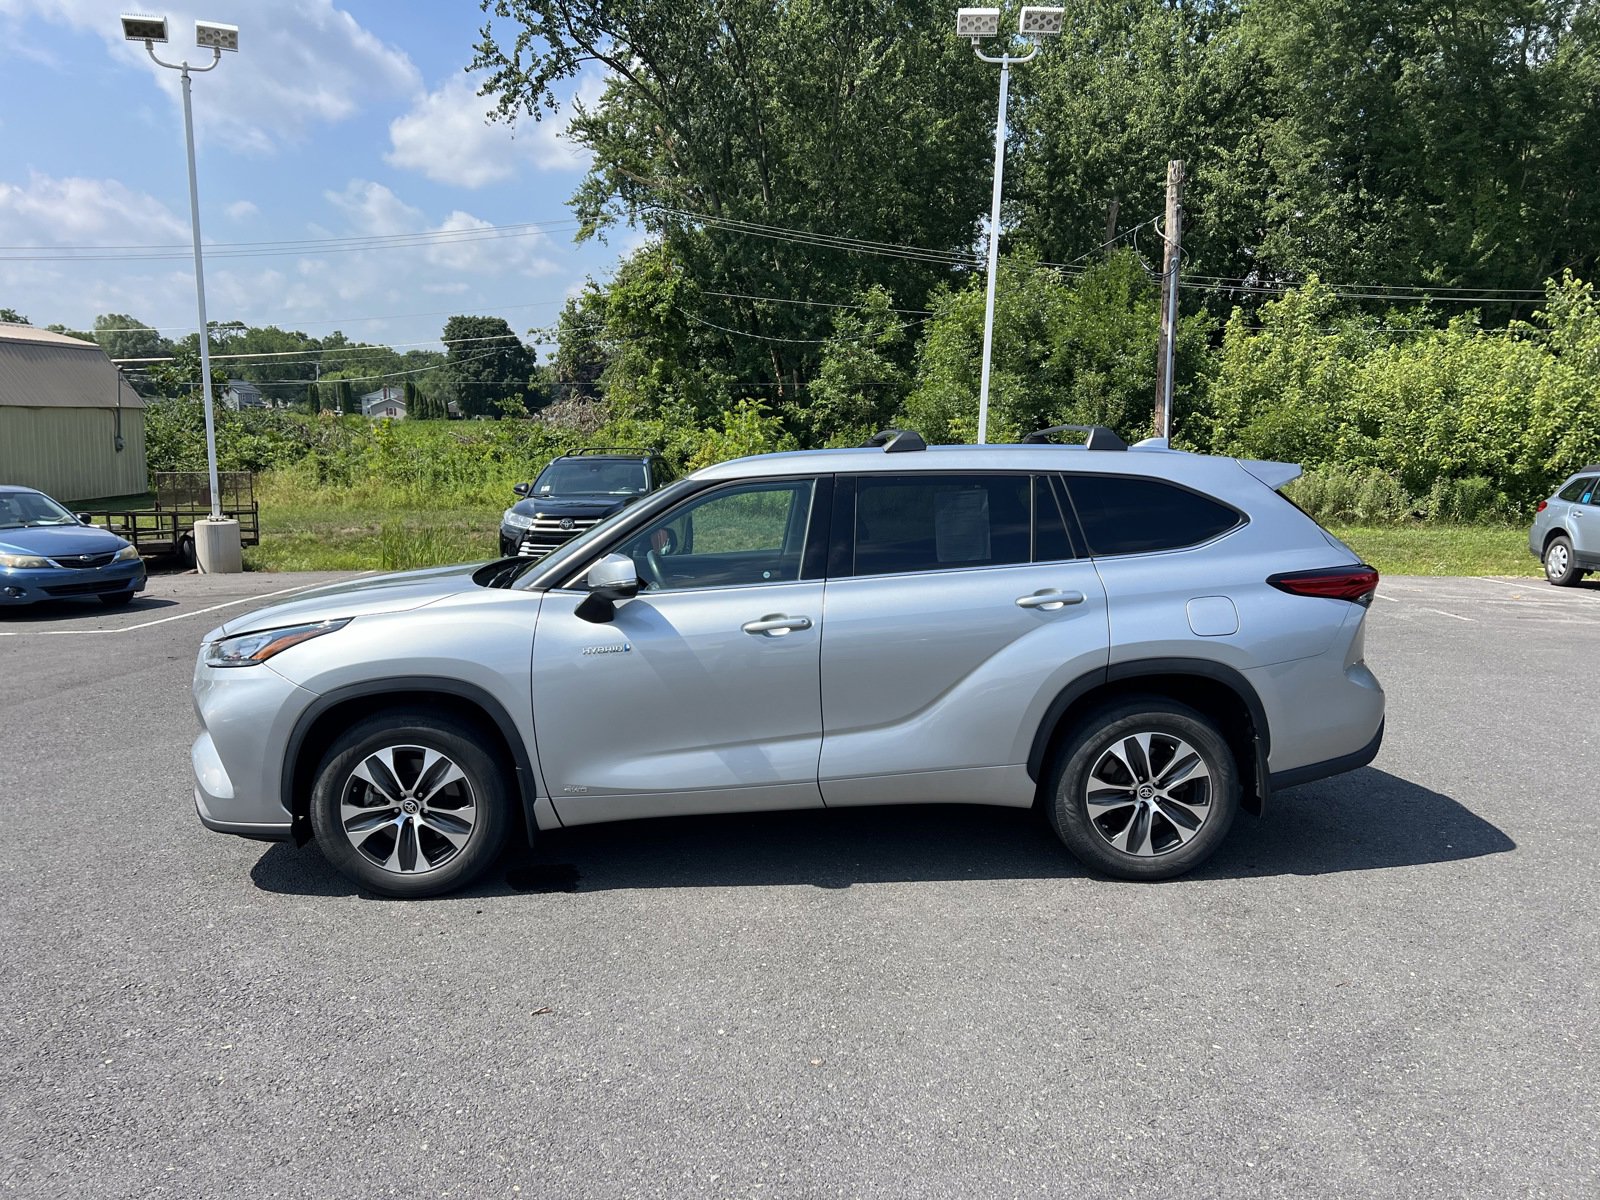 Used 2020 Toyota Highlander XLE with VIN 5TDHBRCH5LS503107 for sale in Selinsgrove, PA